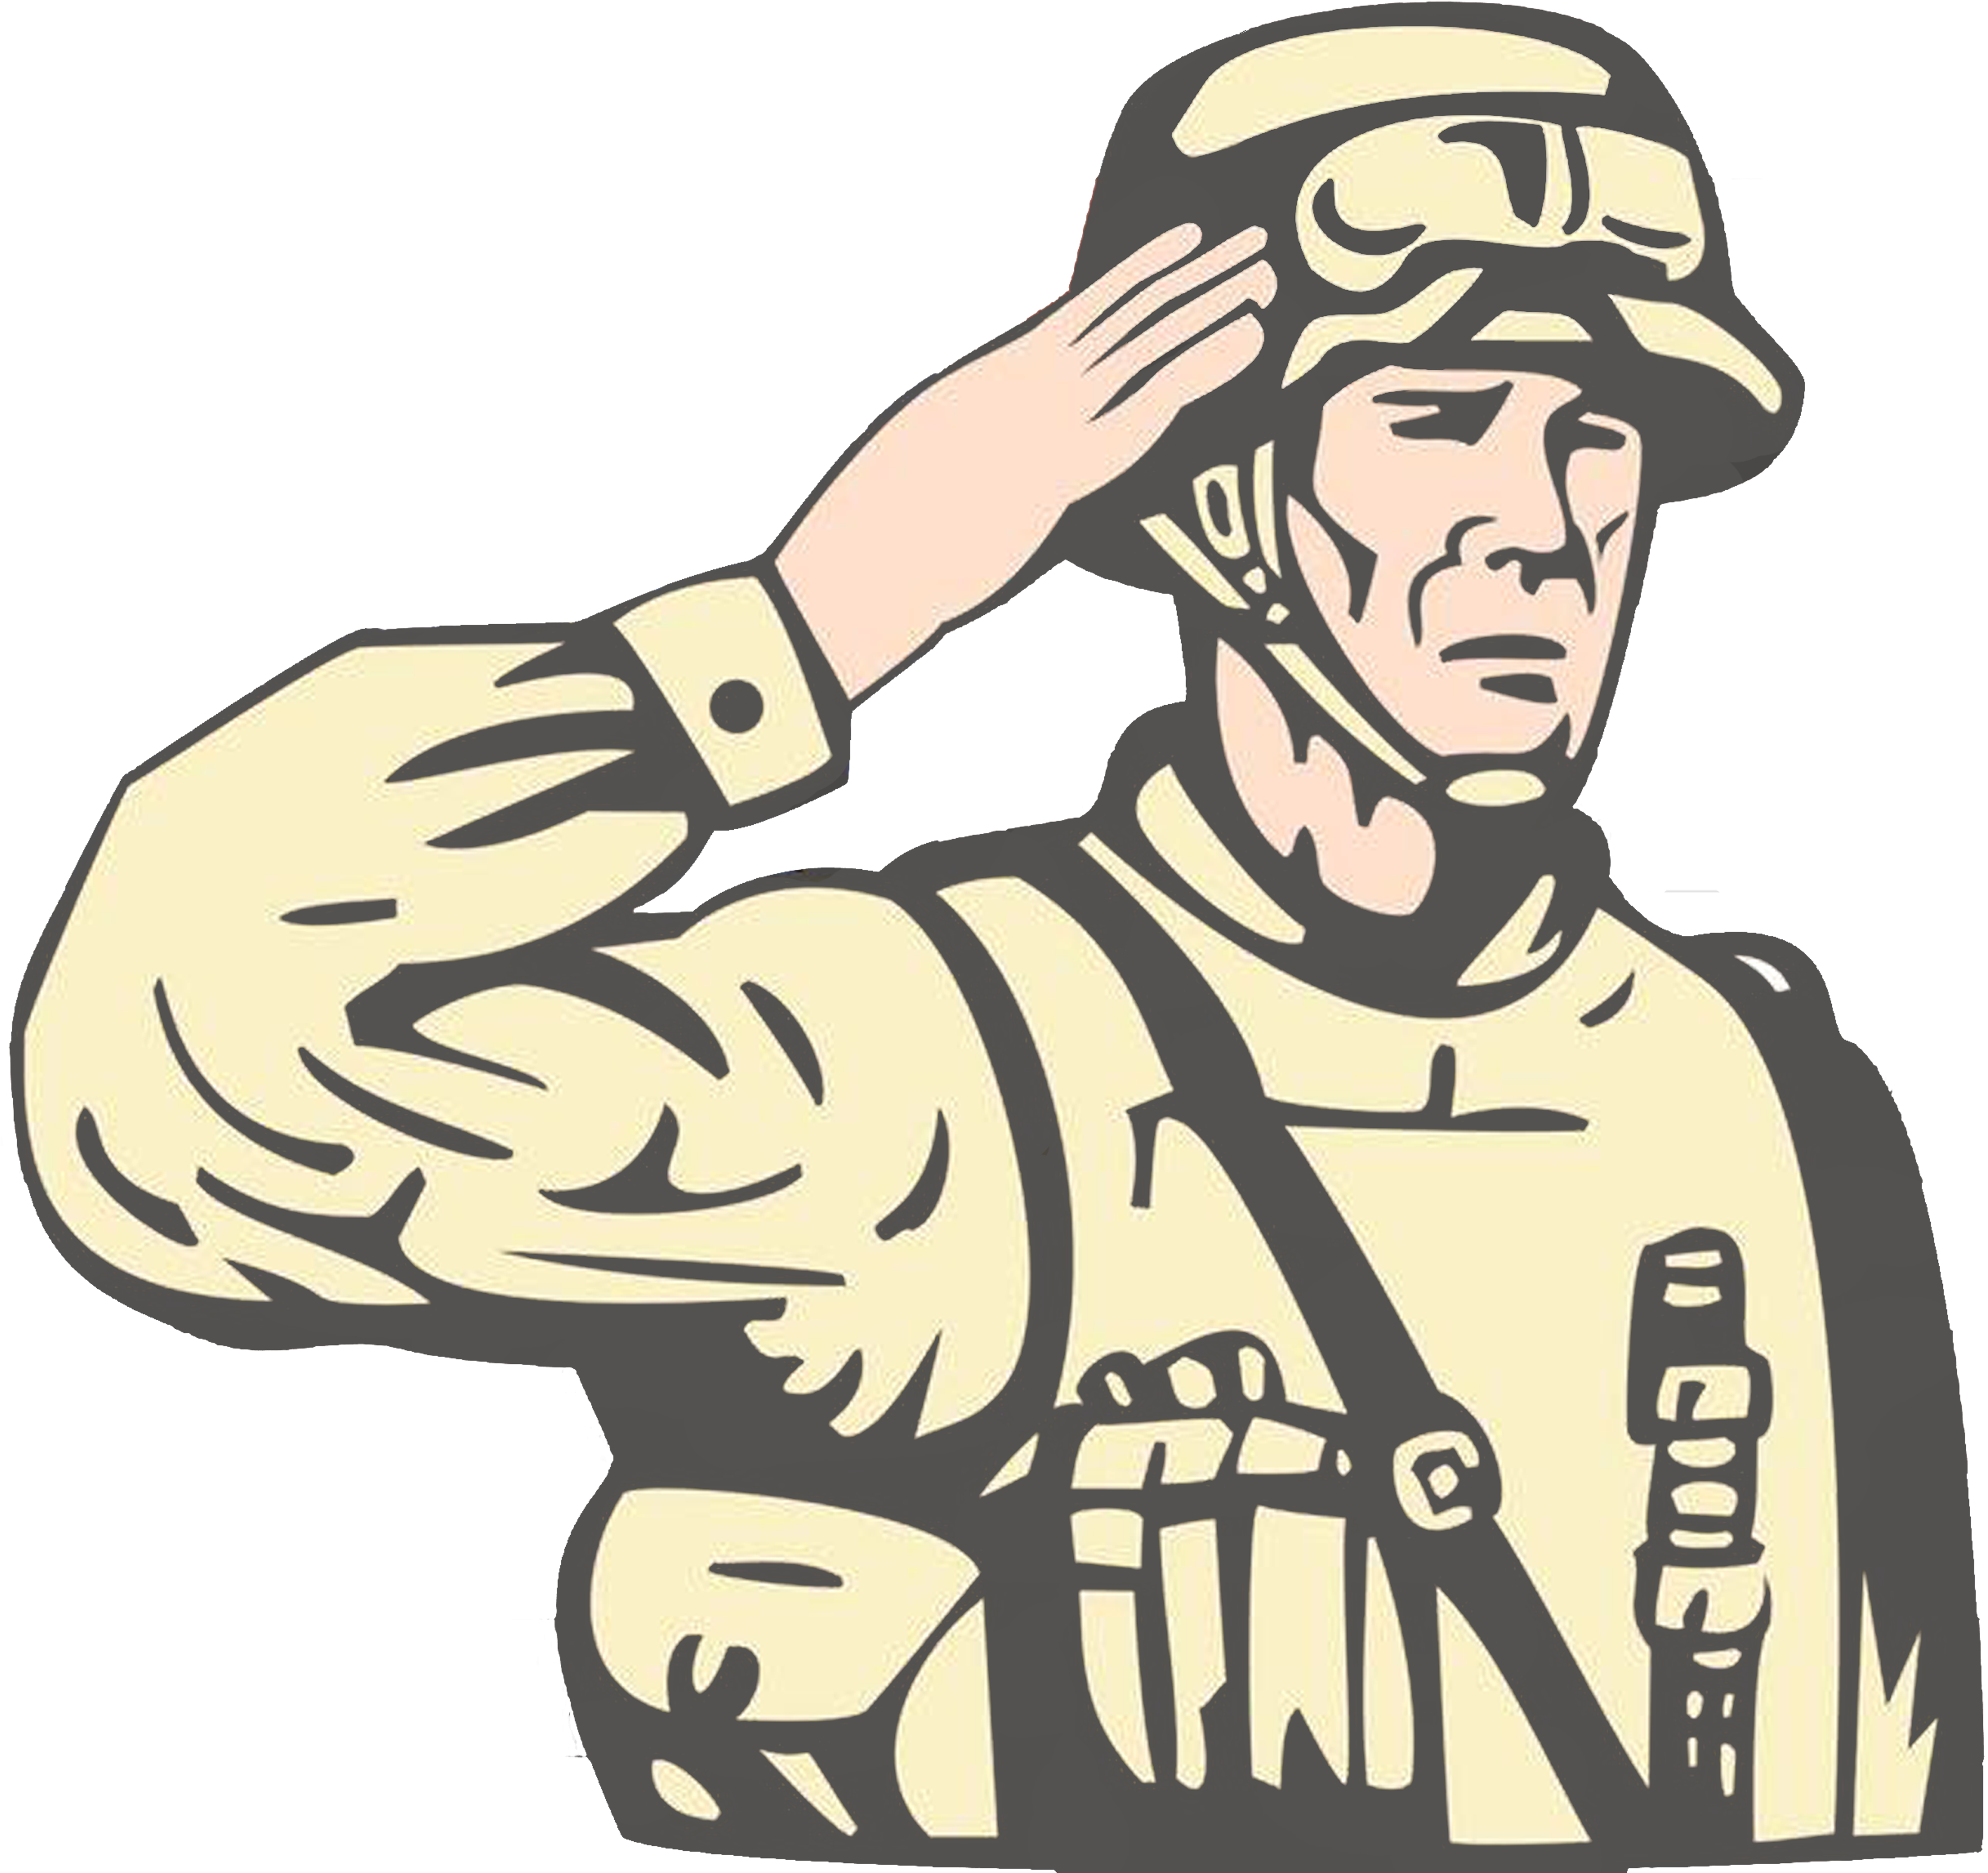 United States Royalty-free Military Soldier Illustration - Provide For The Common Defence (5000x5000)